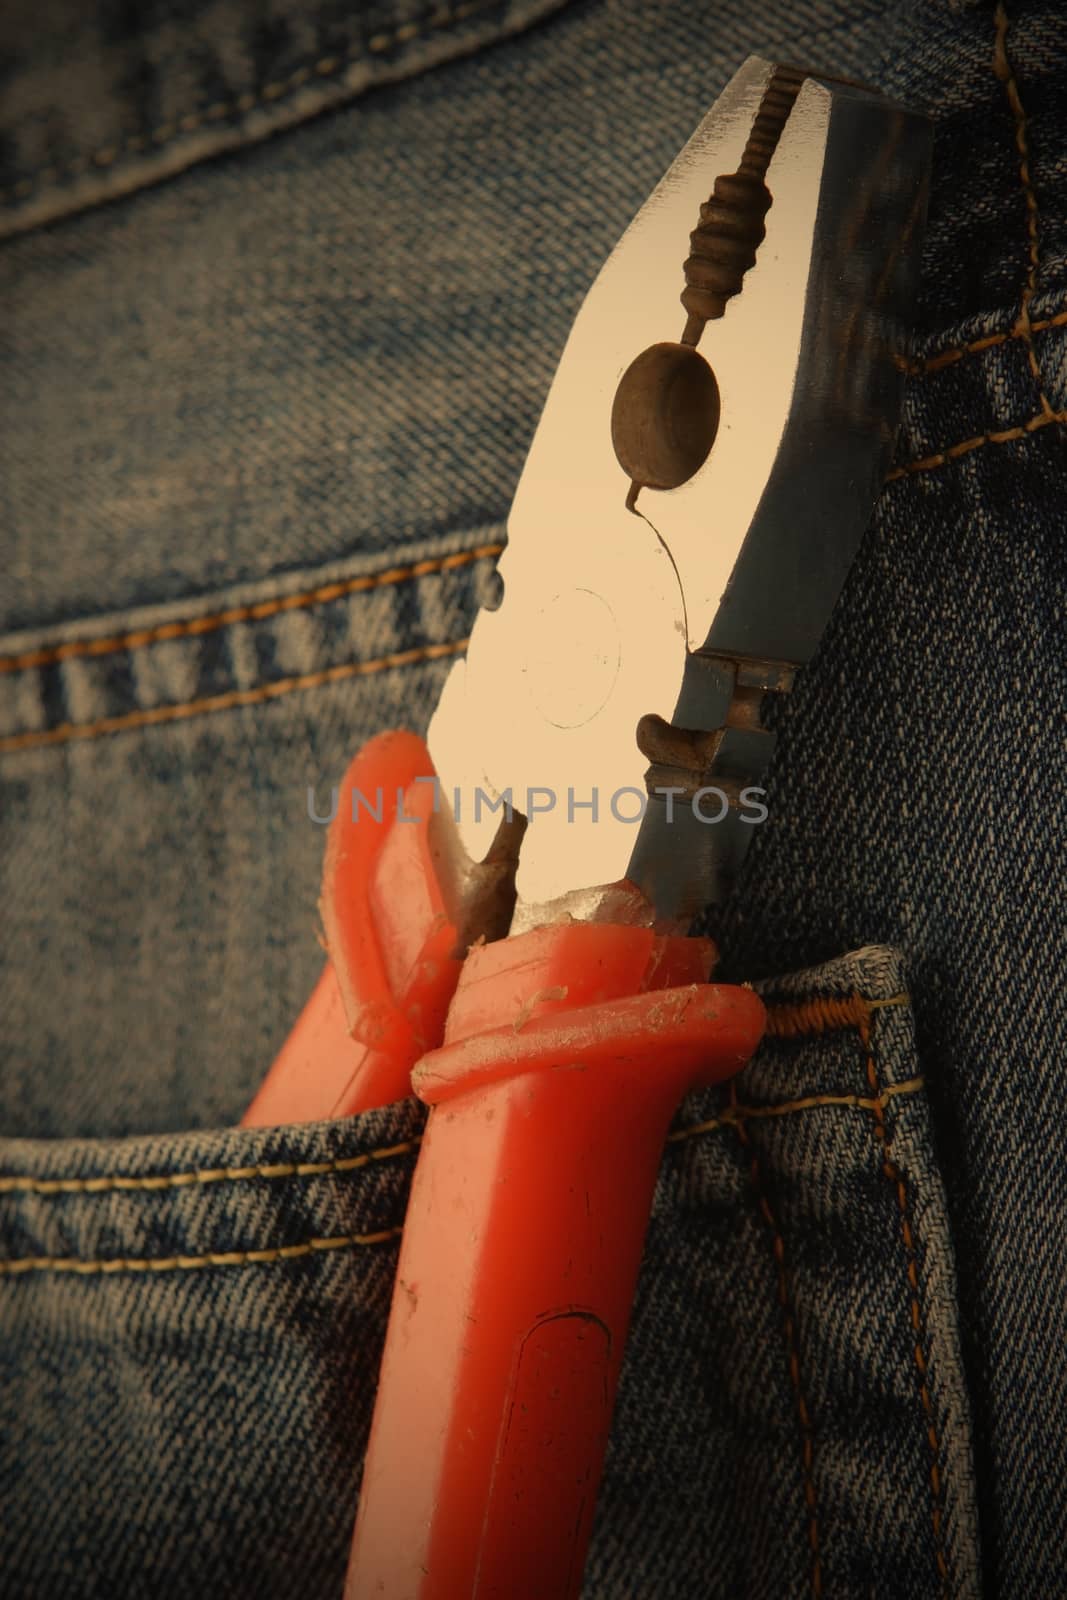 pliers in jeans pocket by Astroid